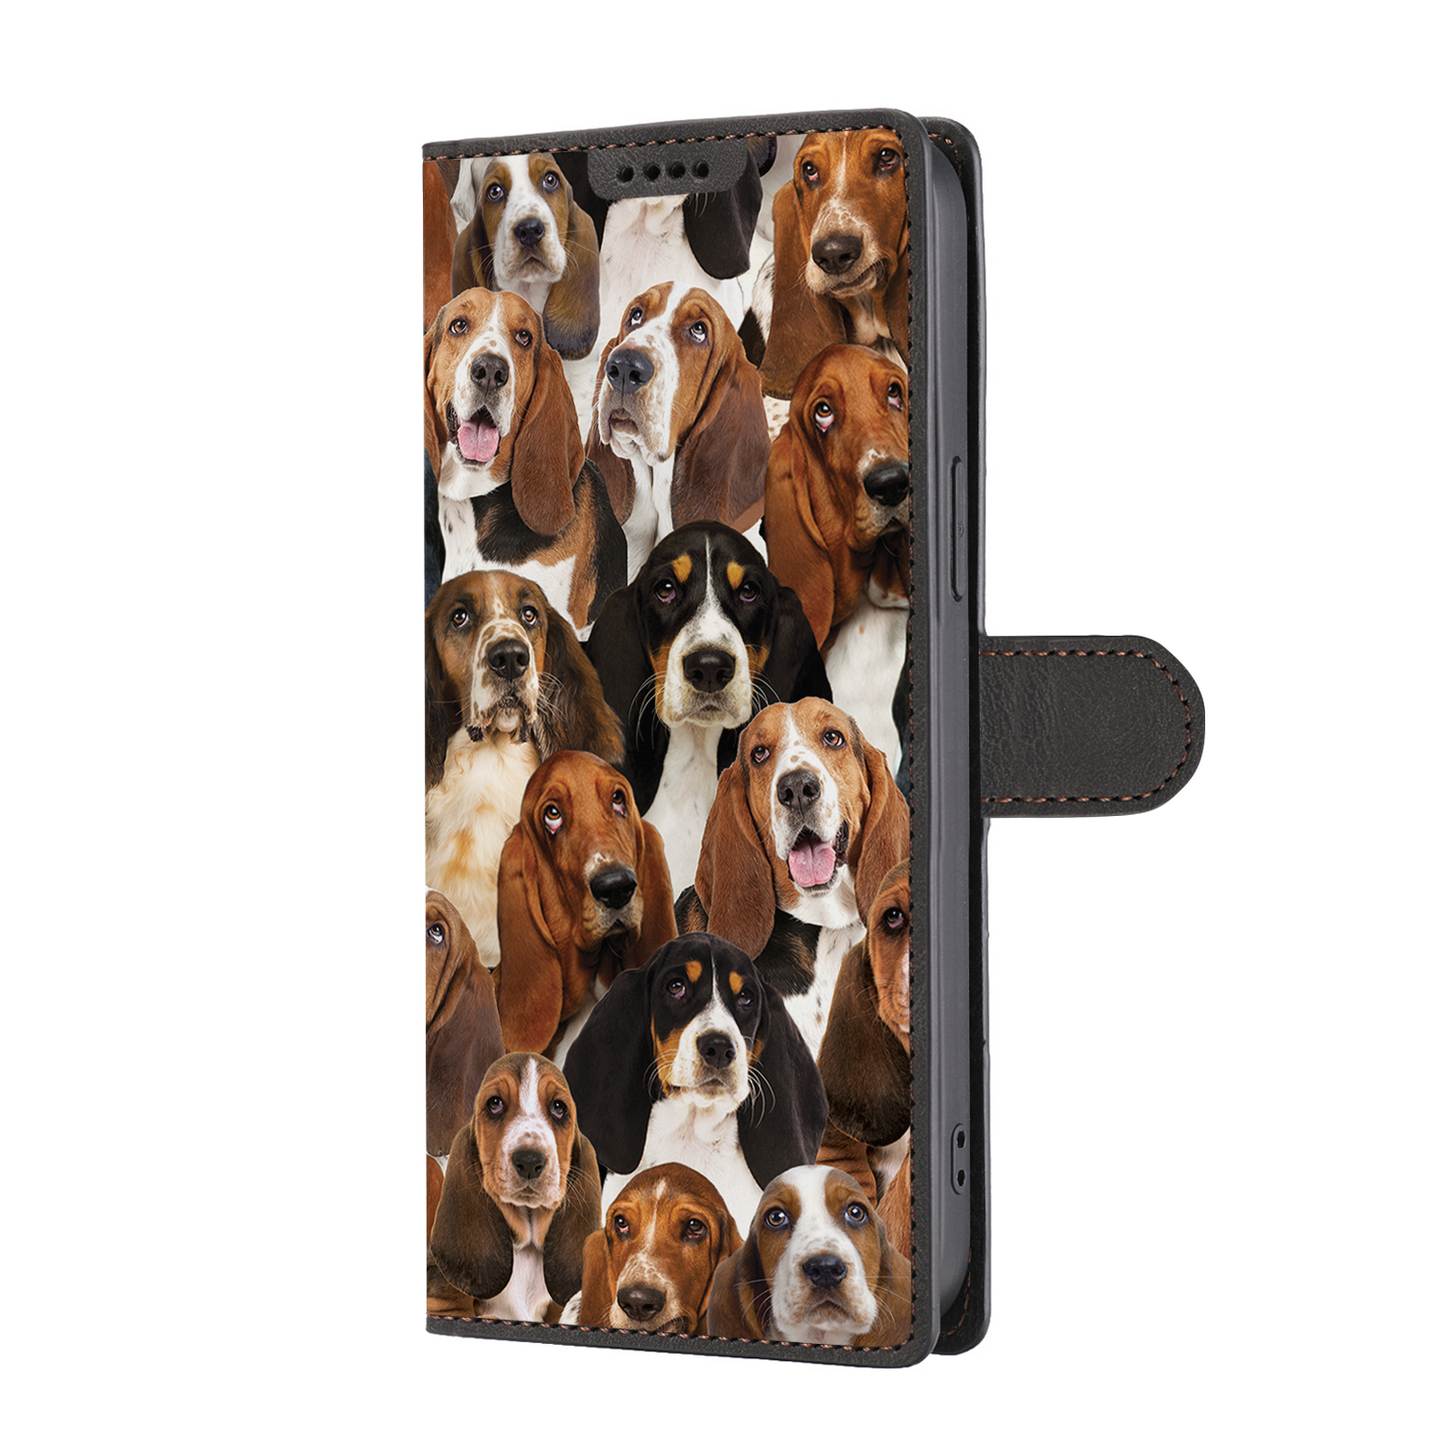 You Will Have A Bunch Of Basset Hounds - Wallet Case